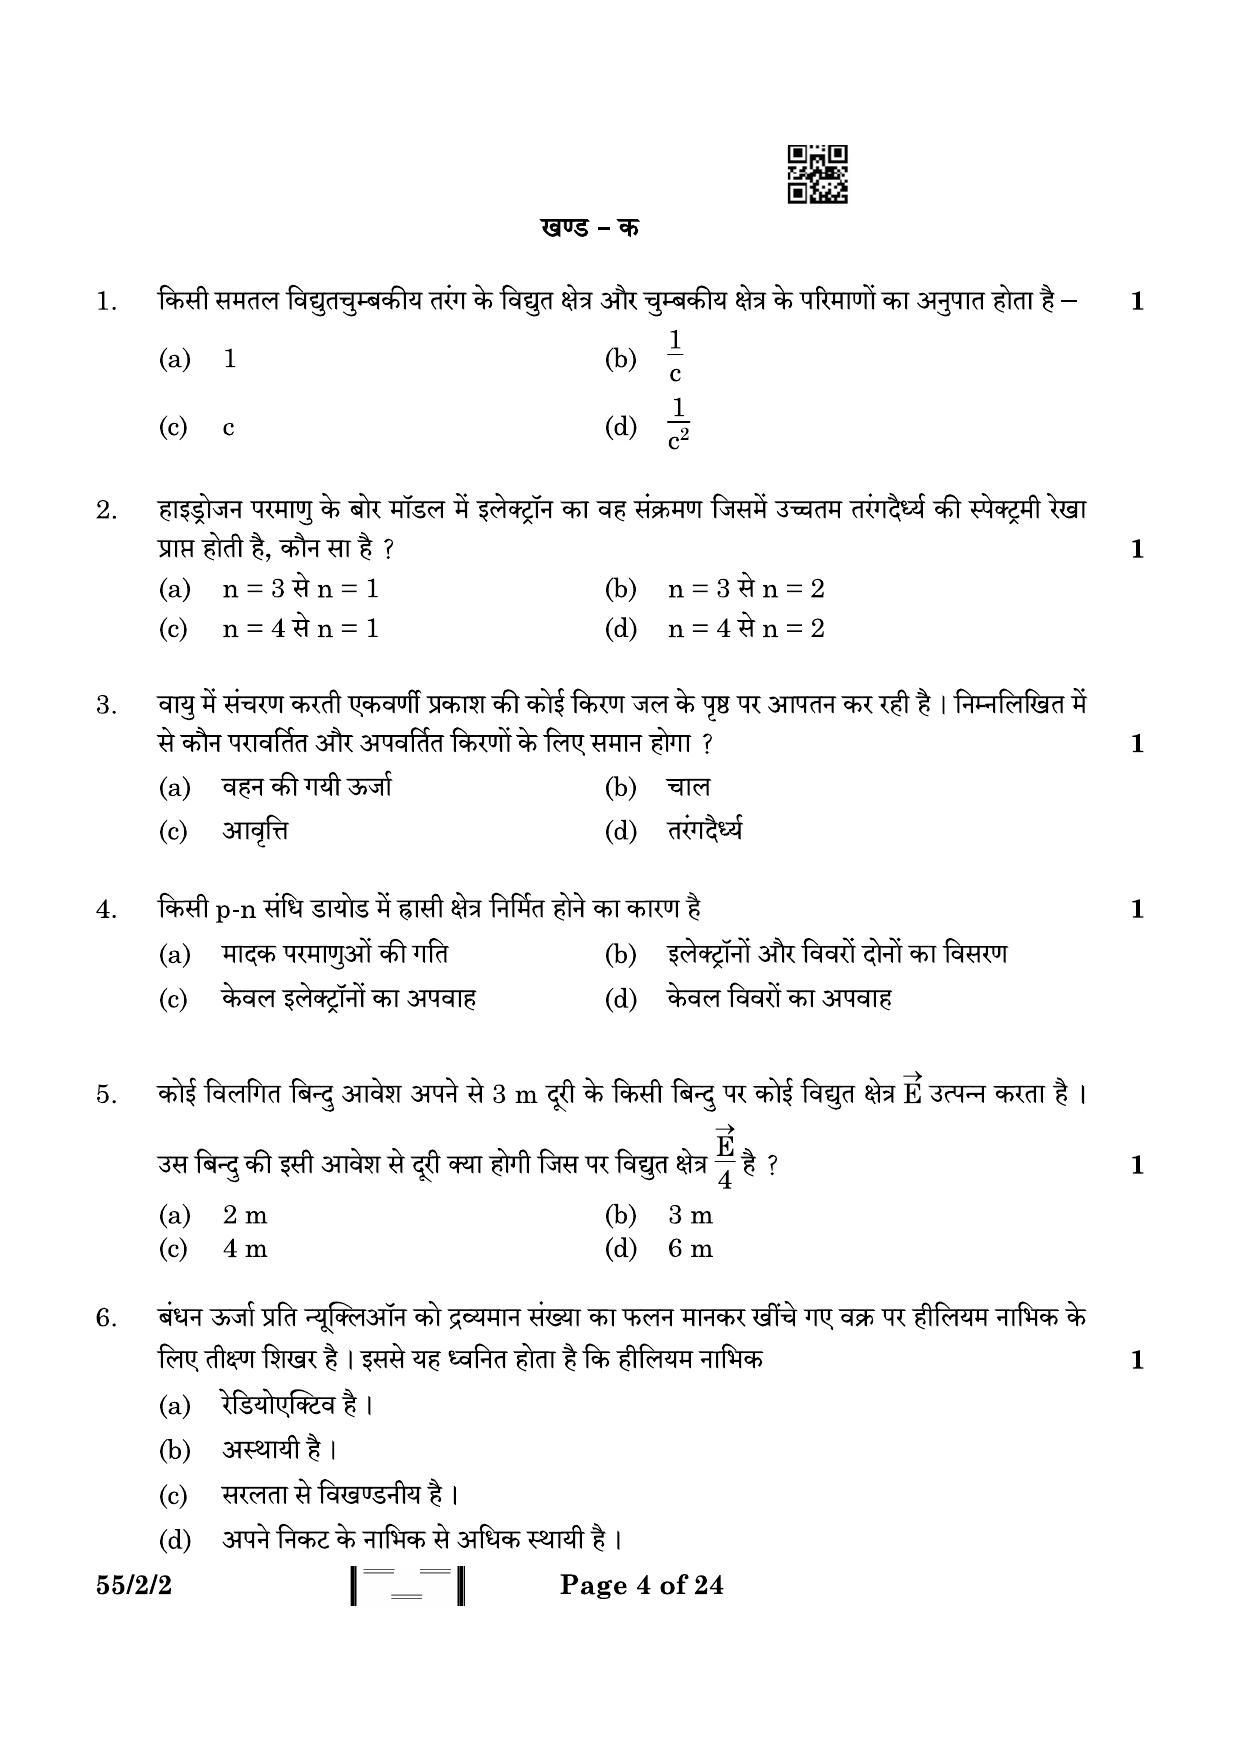 CBSE Class 12 55-2-2 Physics 2023 Question Paper - Page 4